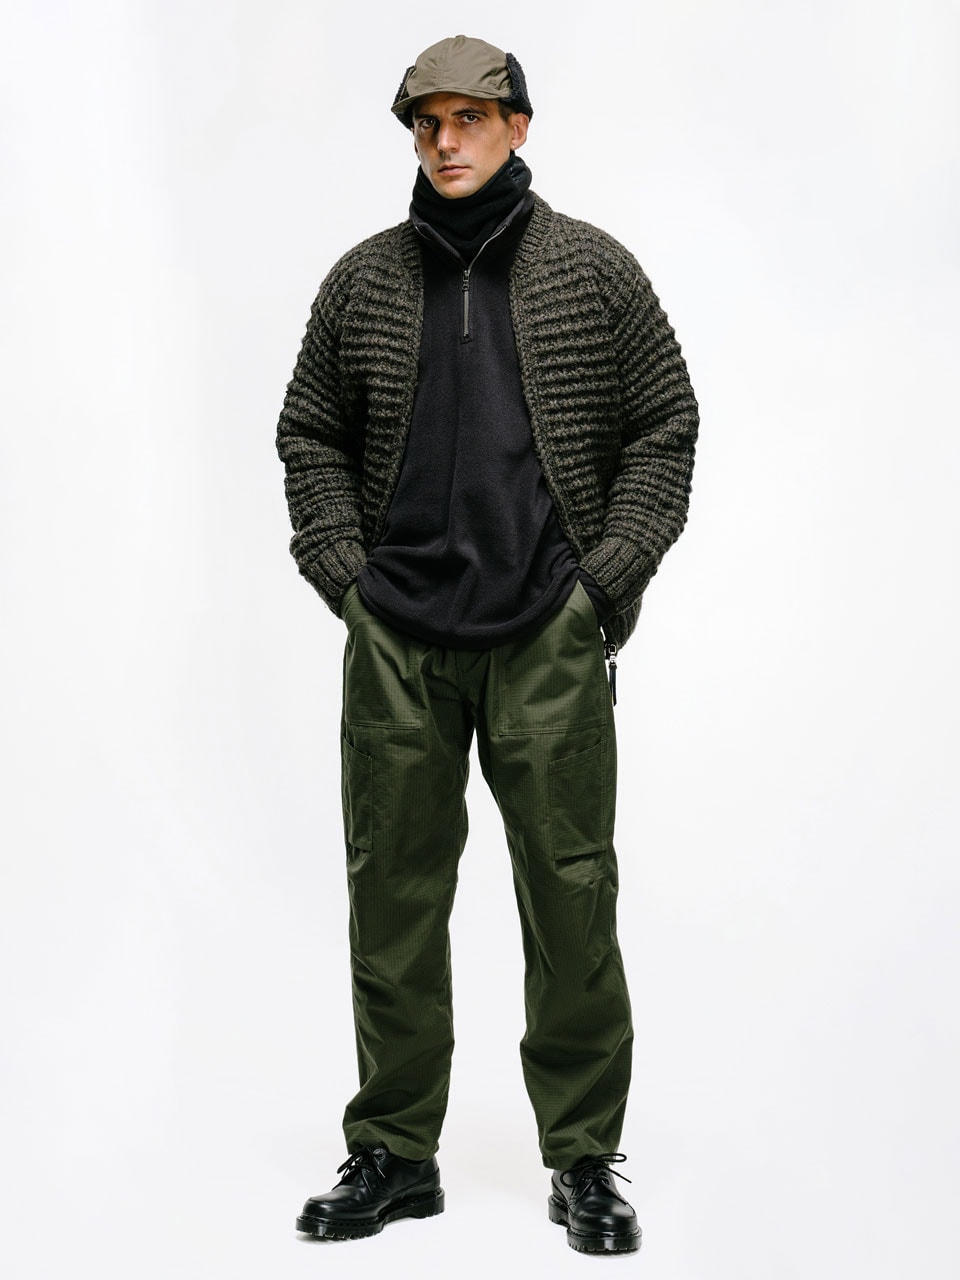 HAVEN Focuses on Performance and Utility With Its FW21 Collection Fashion 